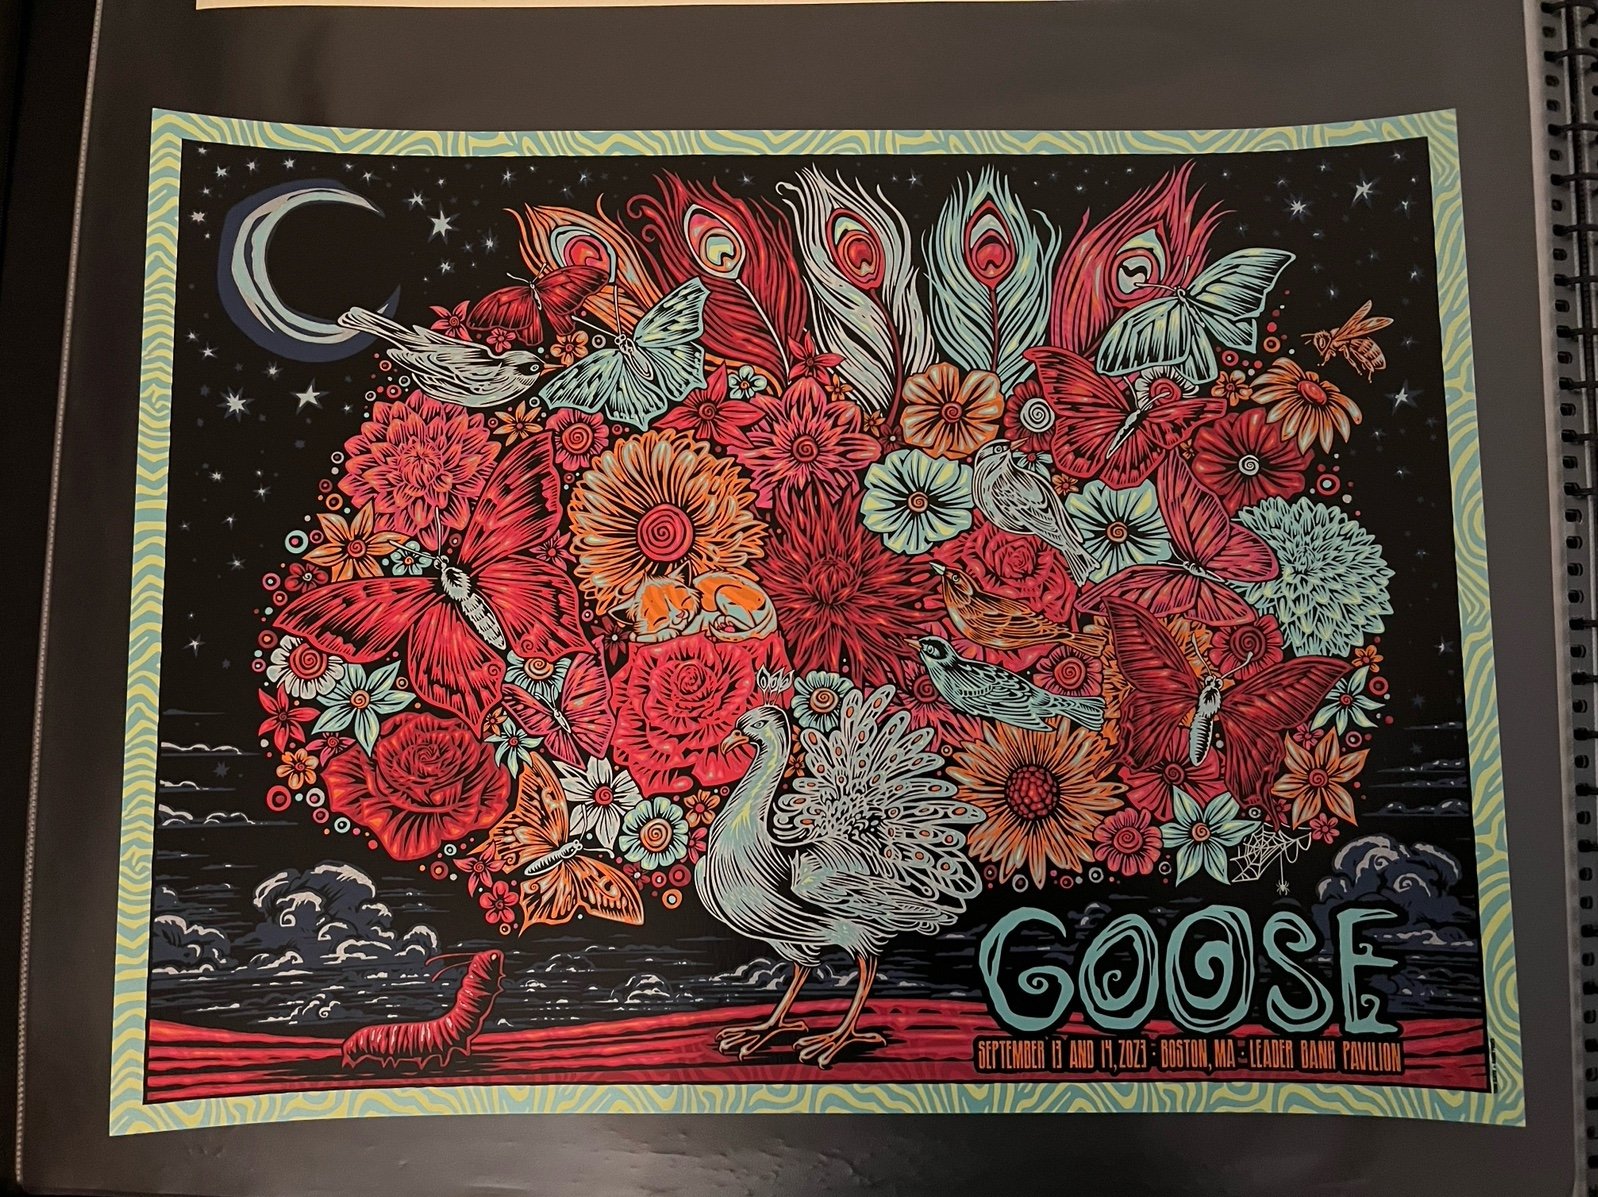 Goose Boston, MA – 9/13 + 9/14 Poster by Todd Slater – Butterflies /85 Web Var 3YEJhFwWH